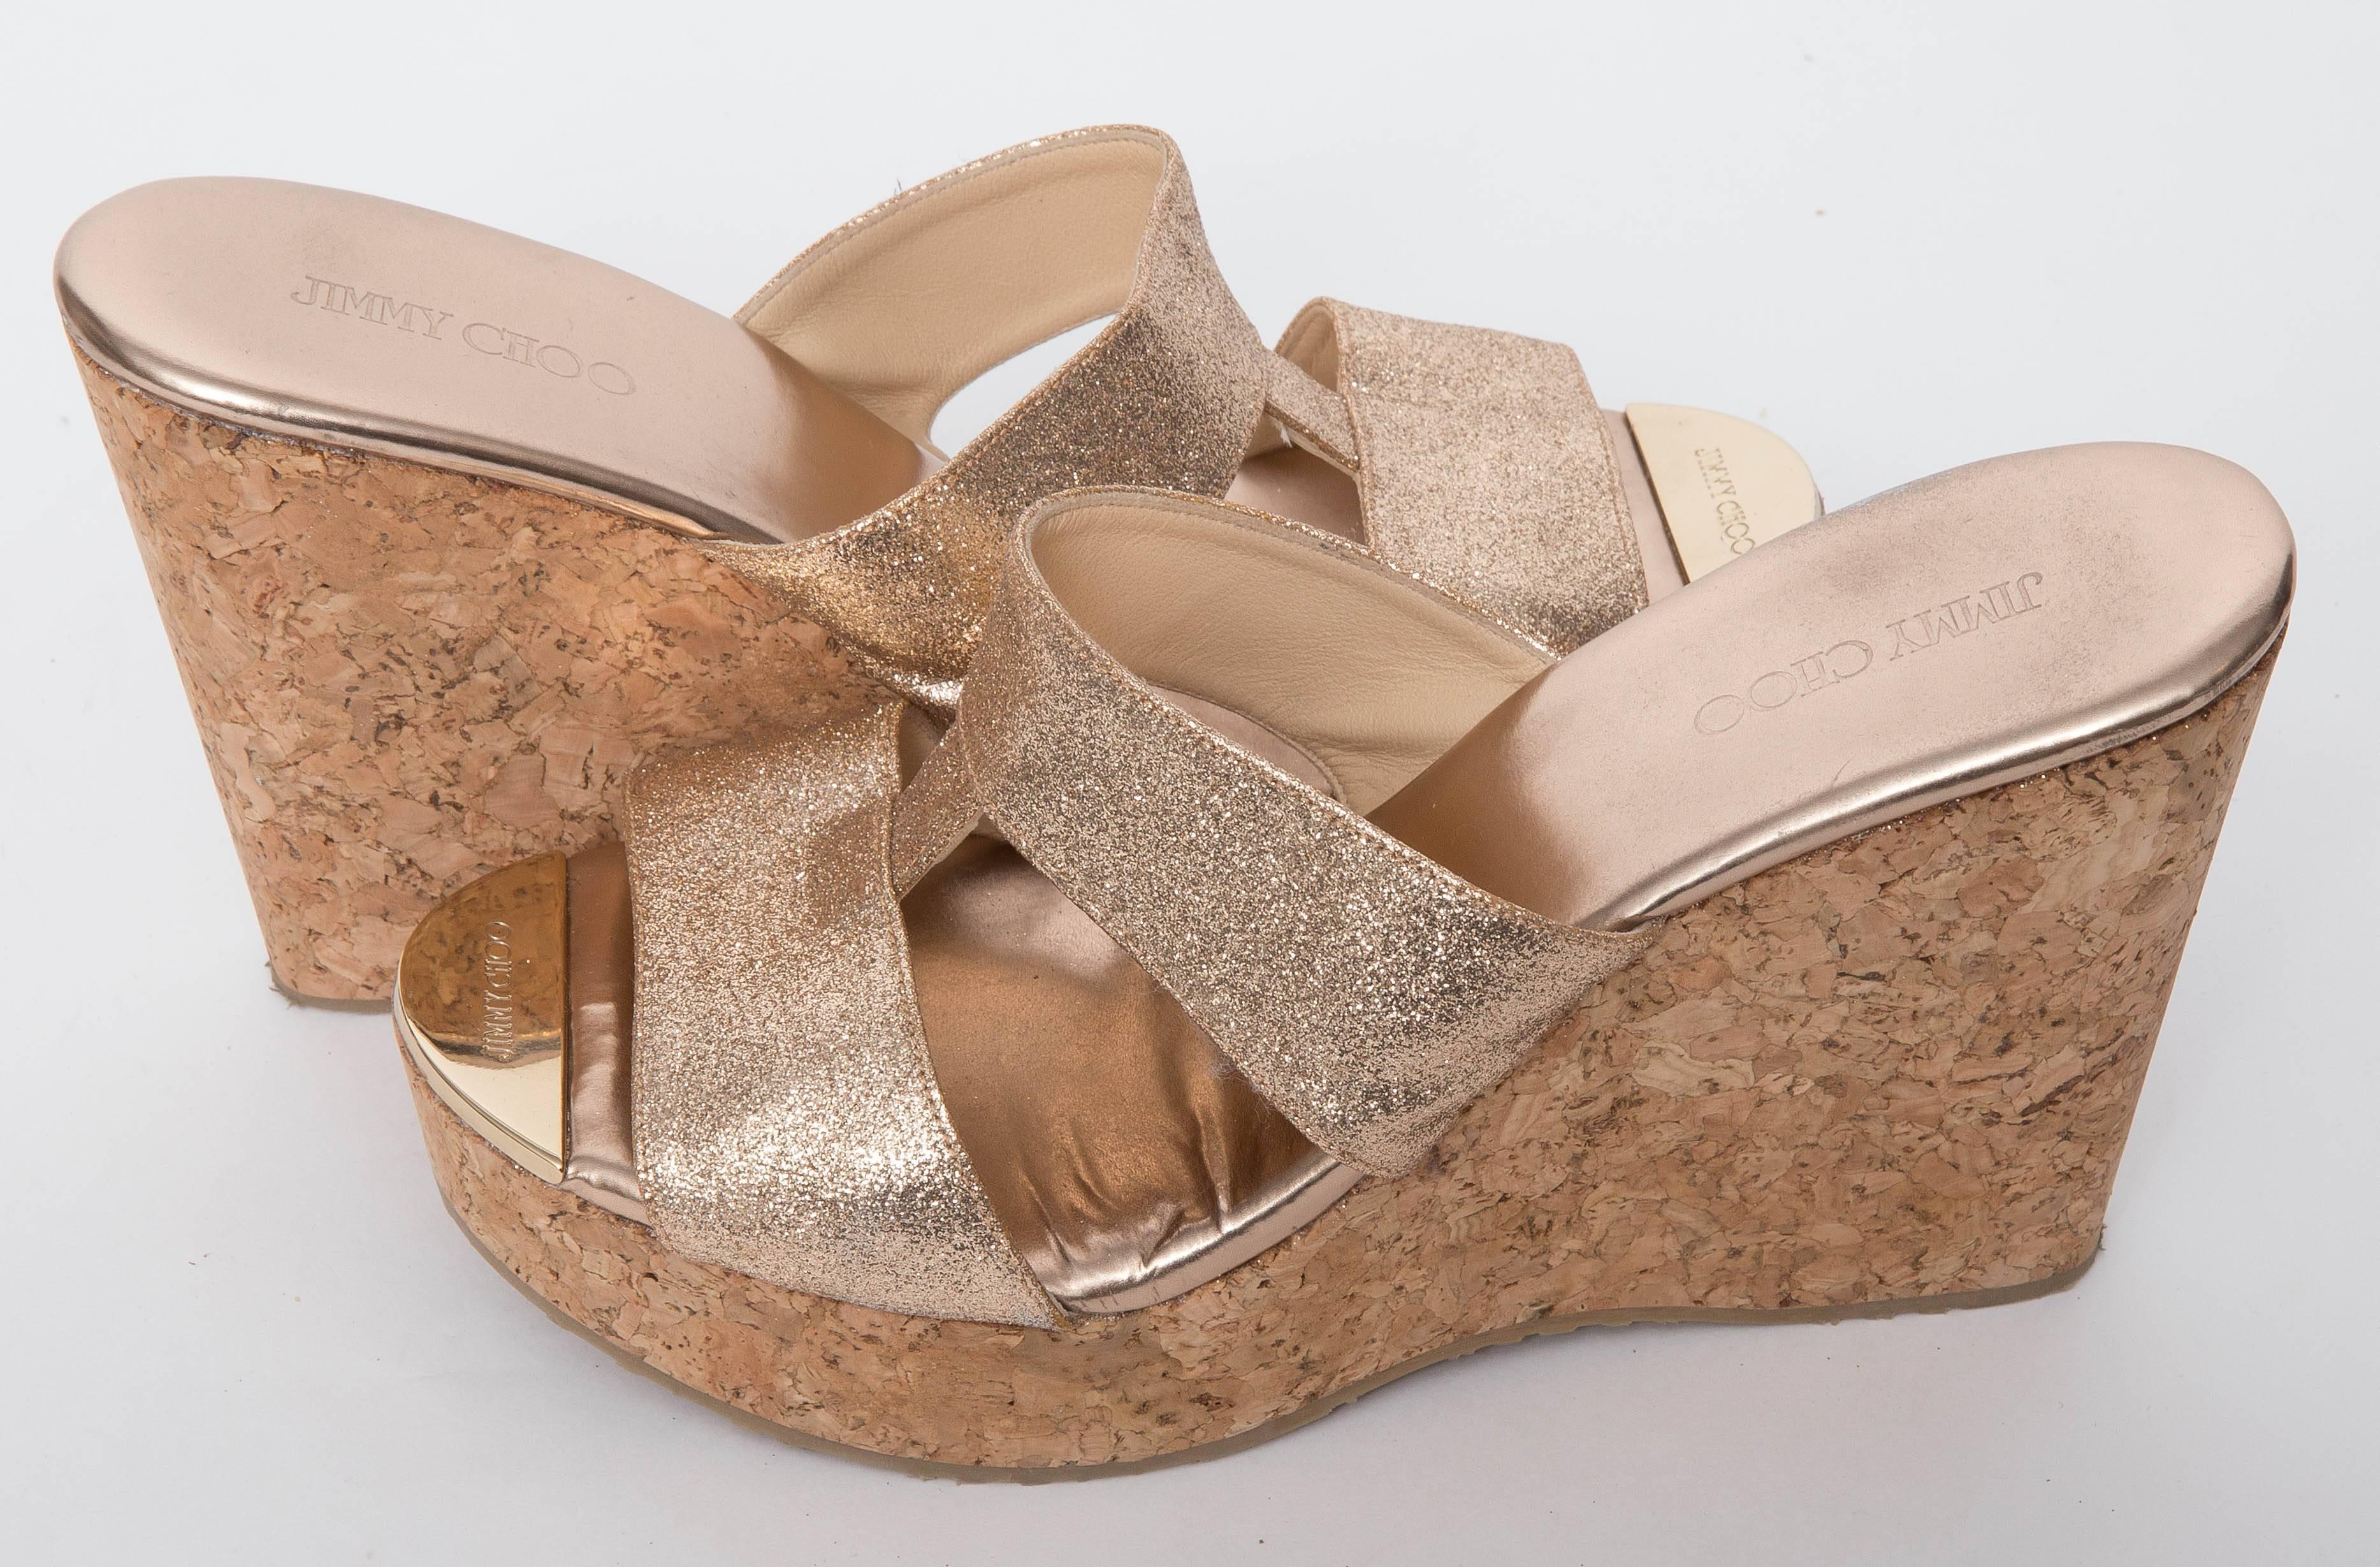 Jimmy Choo Porter Glitter Wedge Sandal in Gold features fine glitter and mirrored leather slide, tonal top-stitching,T-strap connecting double front bands, open-toe with golden logo-engraved plate, and added leather insole.
Does not come with